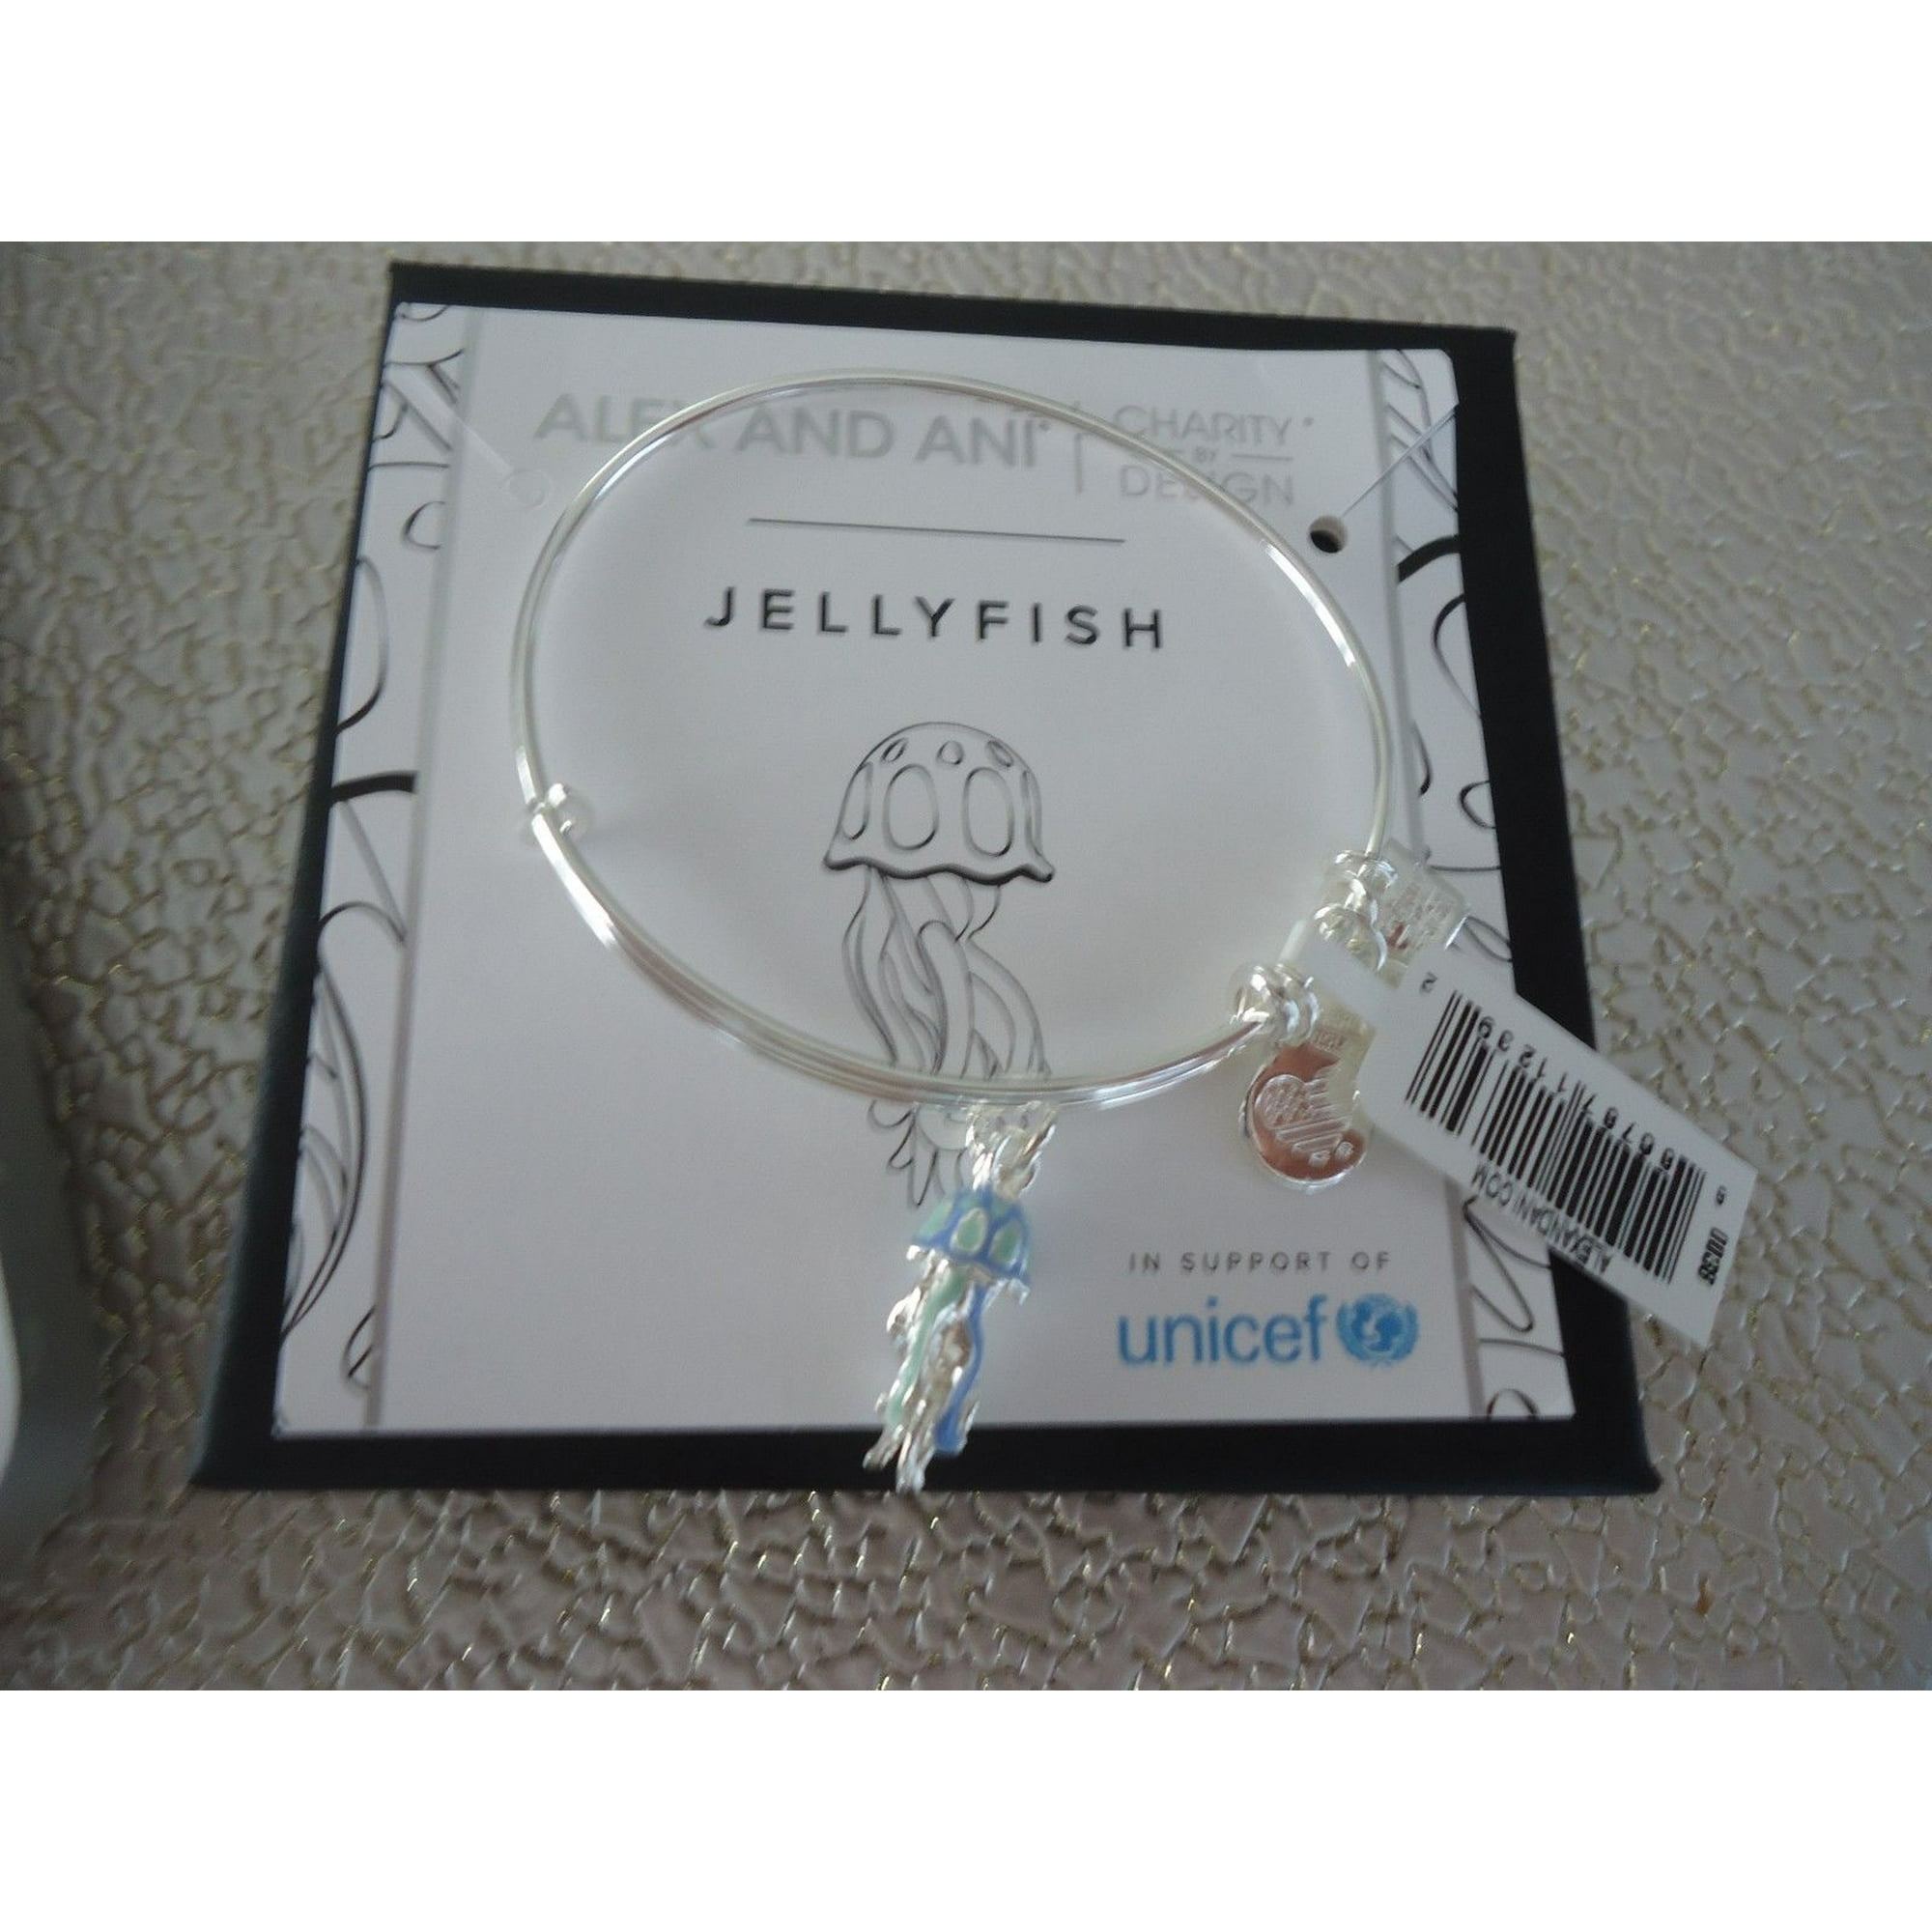 JELLYFISH Shiny Silver UNICEF Charm Bangle New WithTag Card & Box